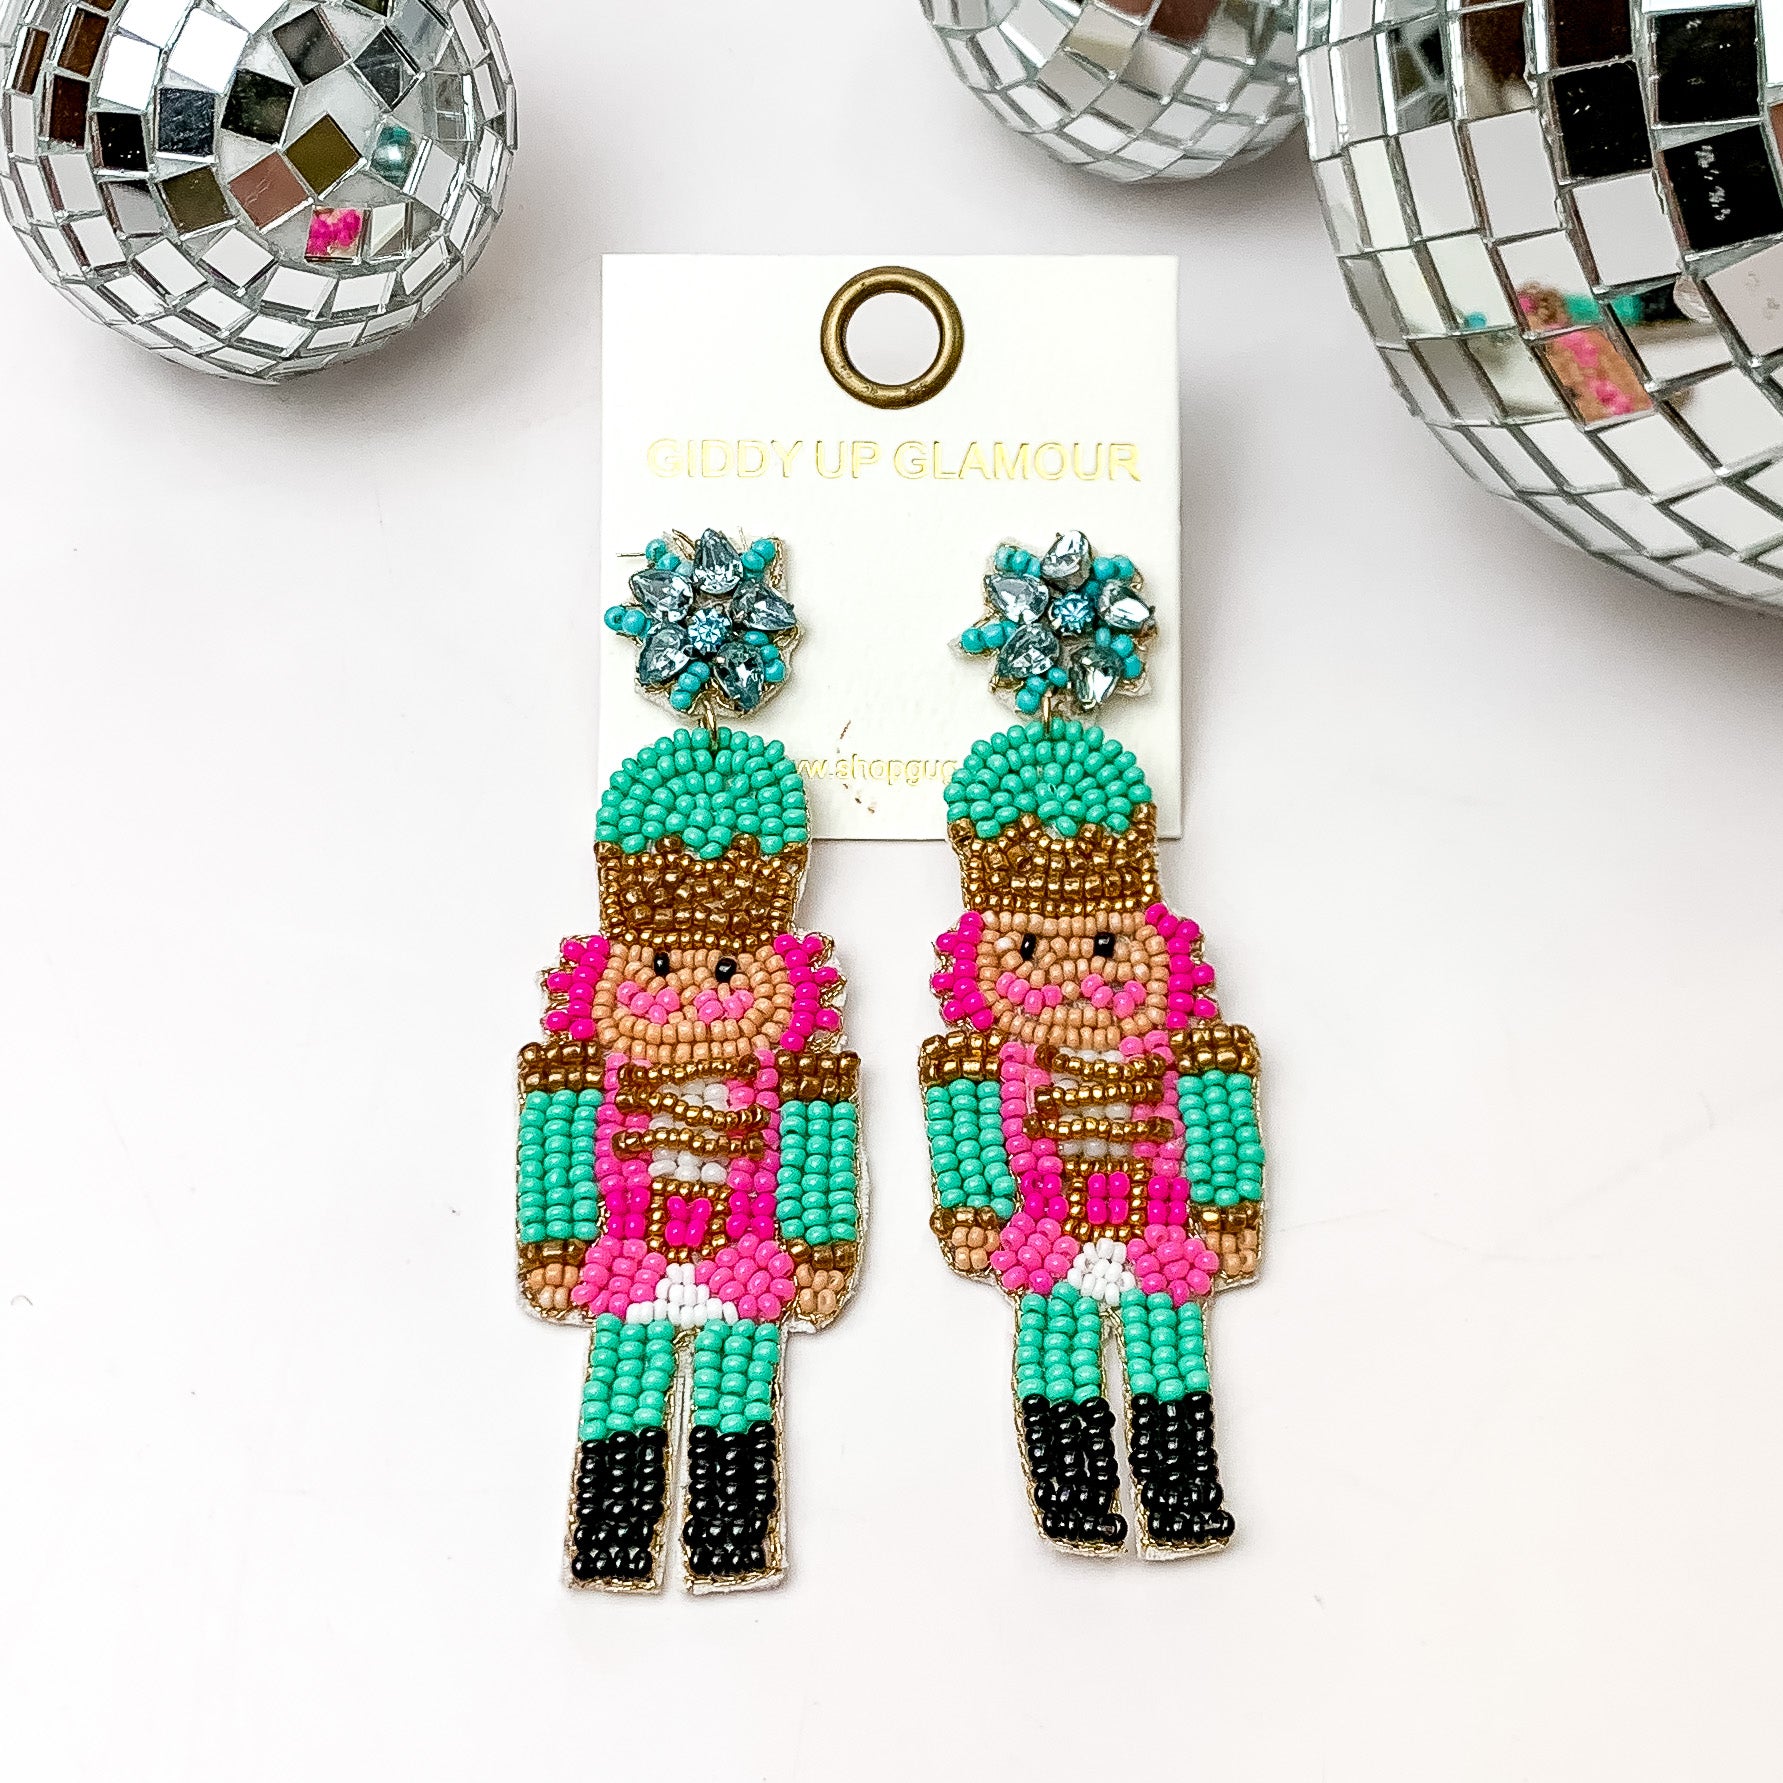 Beaded nutcracker earrings in turquoise and pink. These earrings are pictured on a white background with disco balls at the top. 